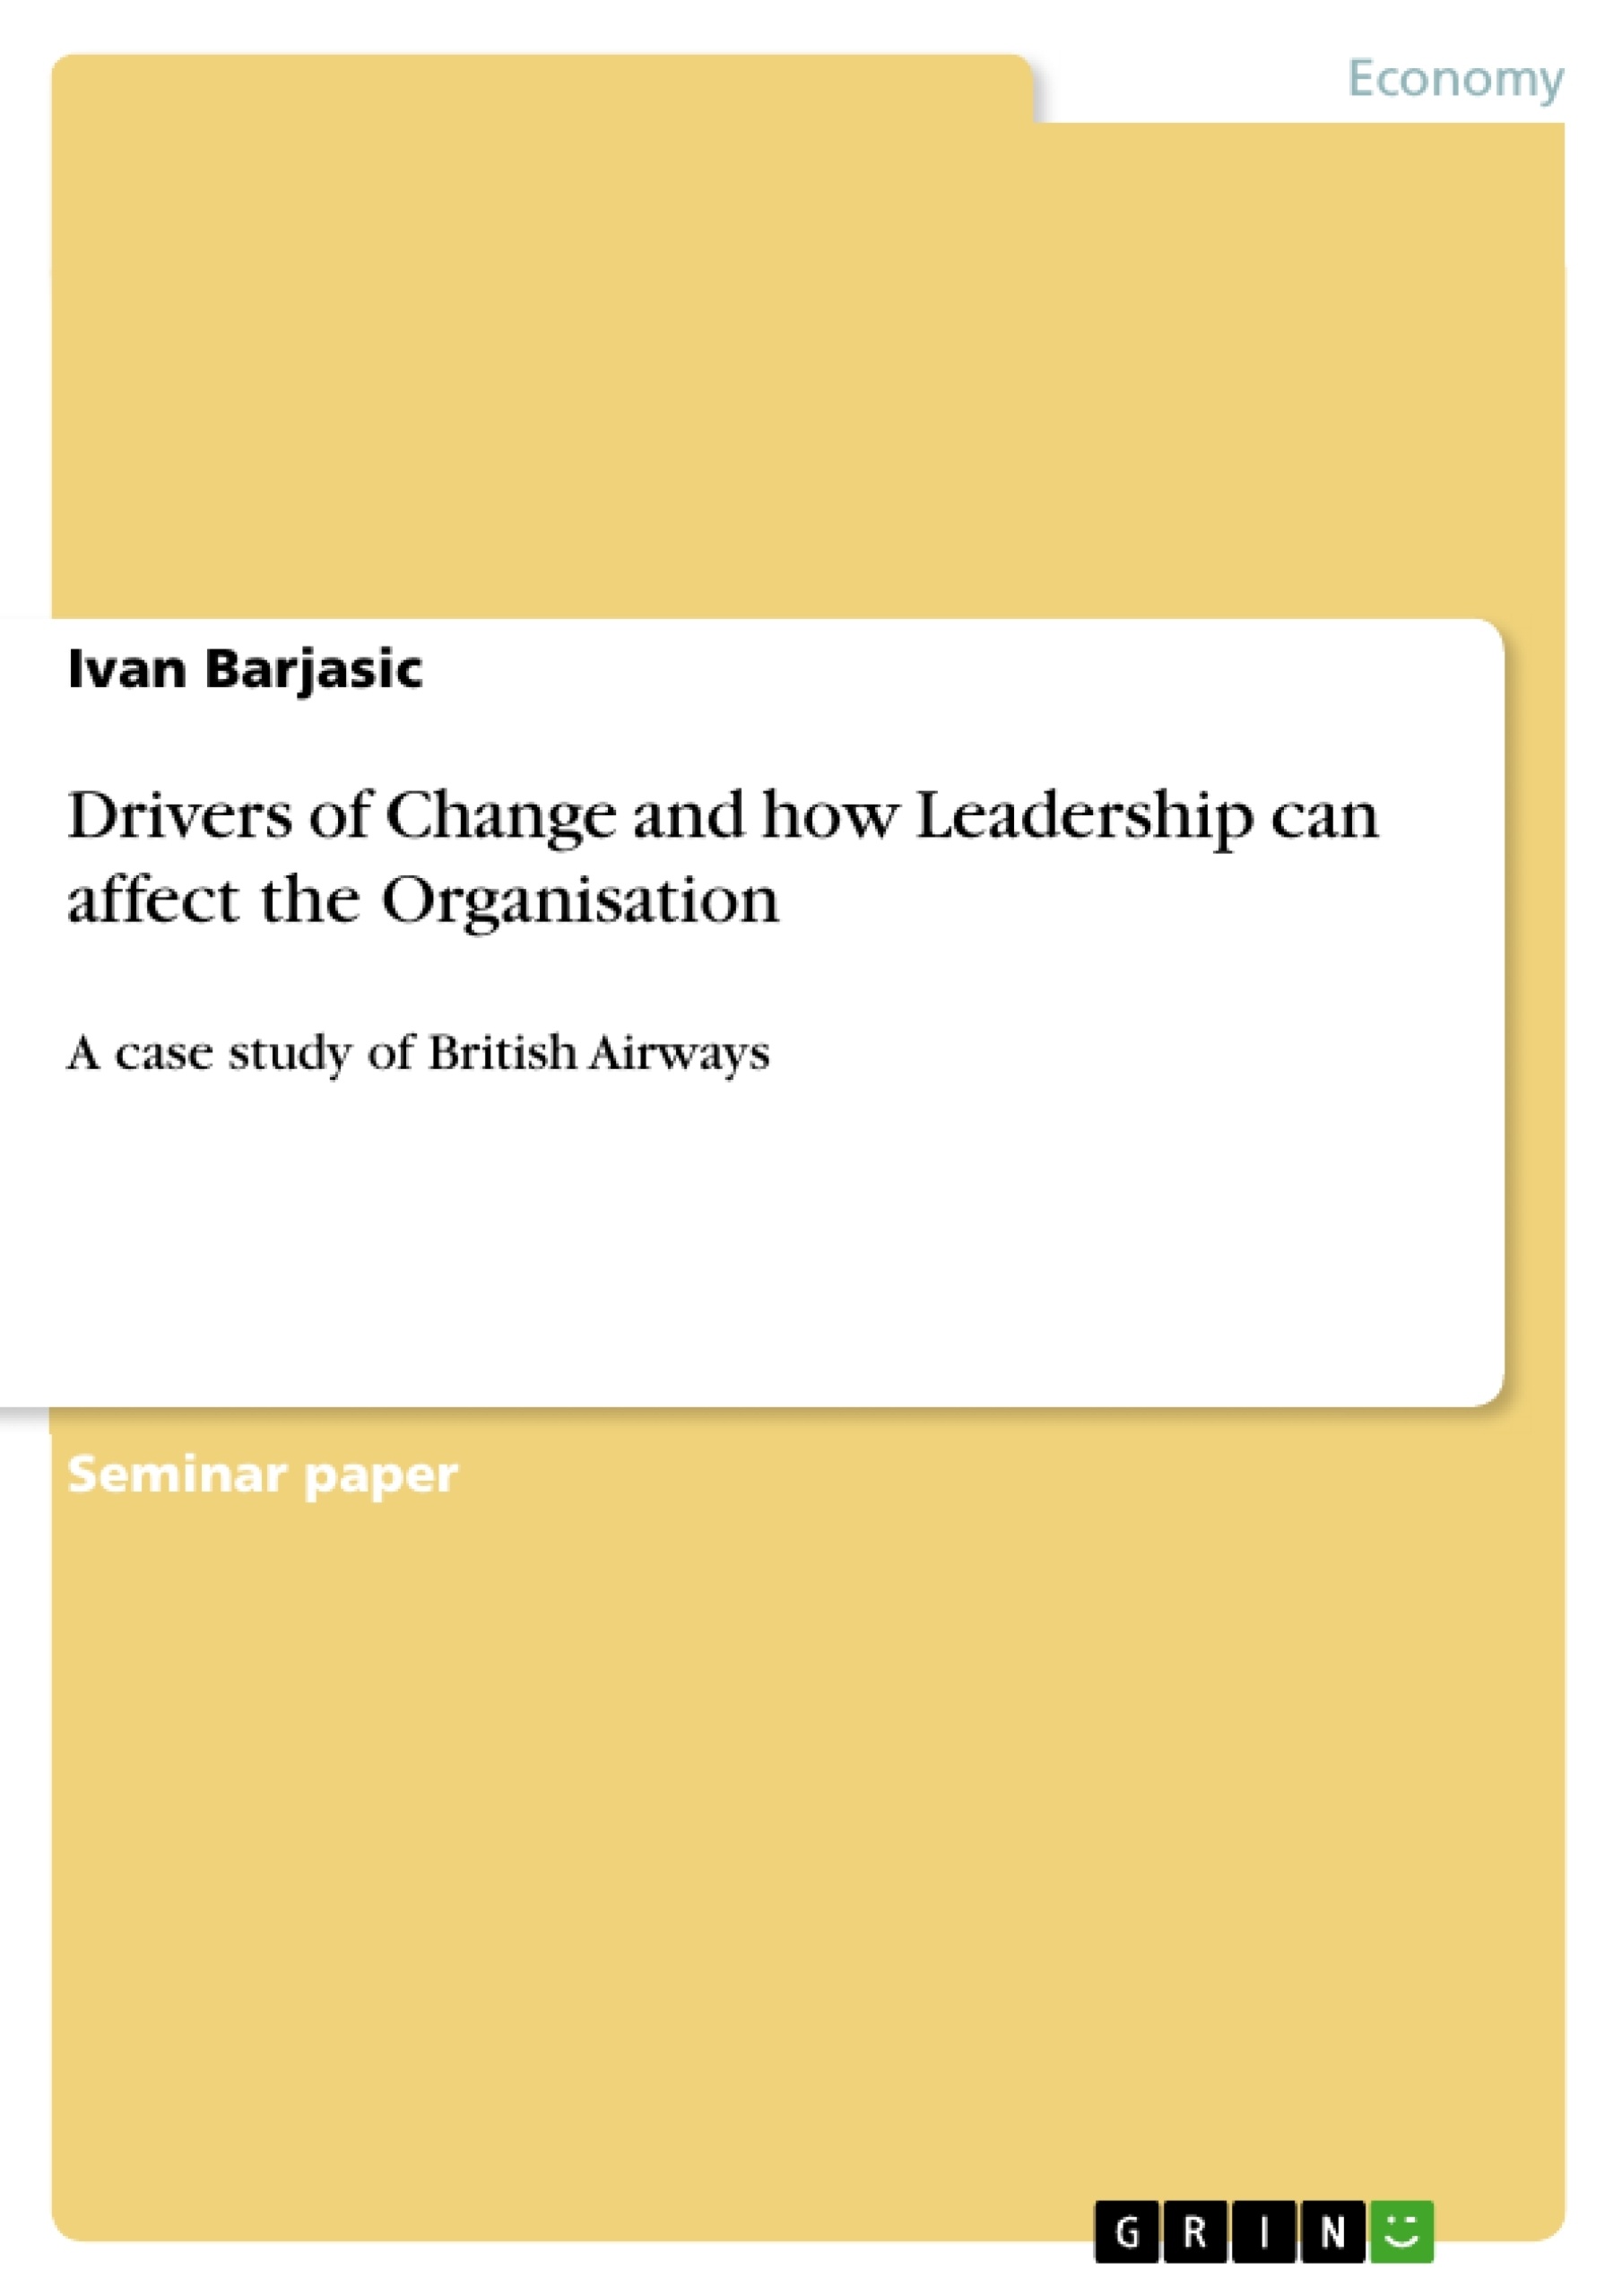 Title: Drivers of Change and how Leadership can affect the Organisation